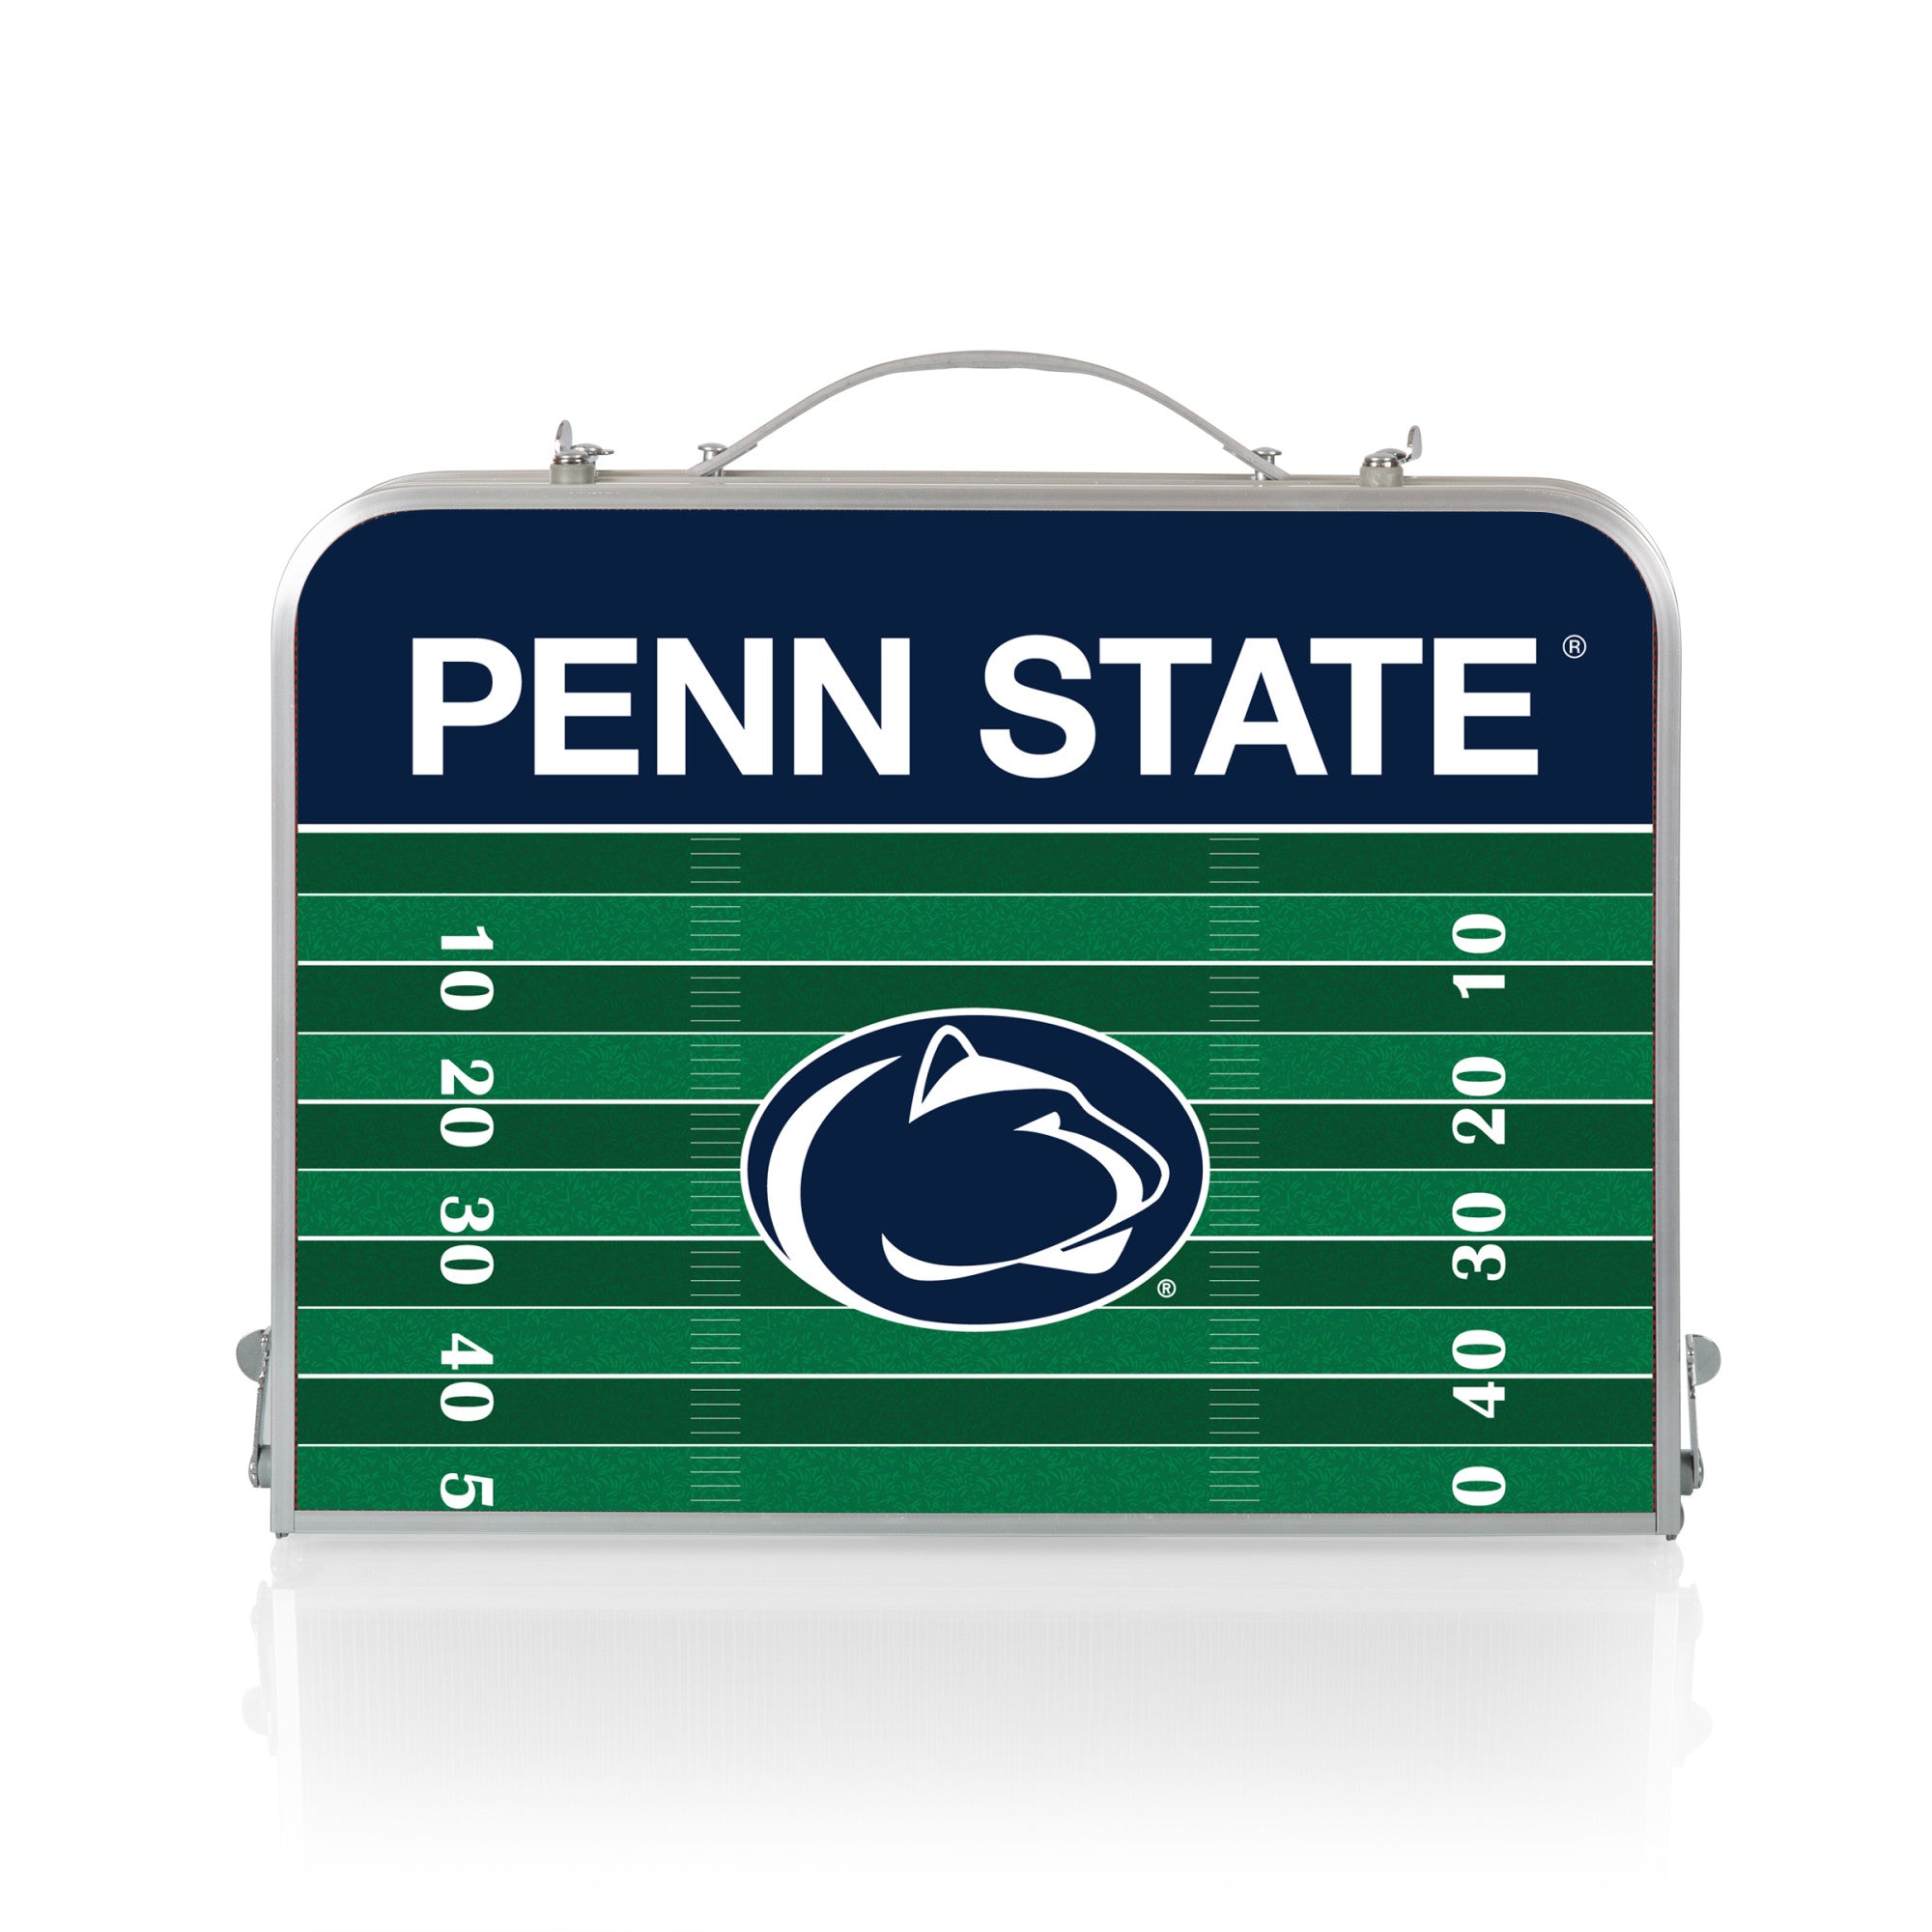 Penn State Nittany Lions - Concert Table Mini Portable Table